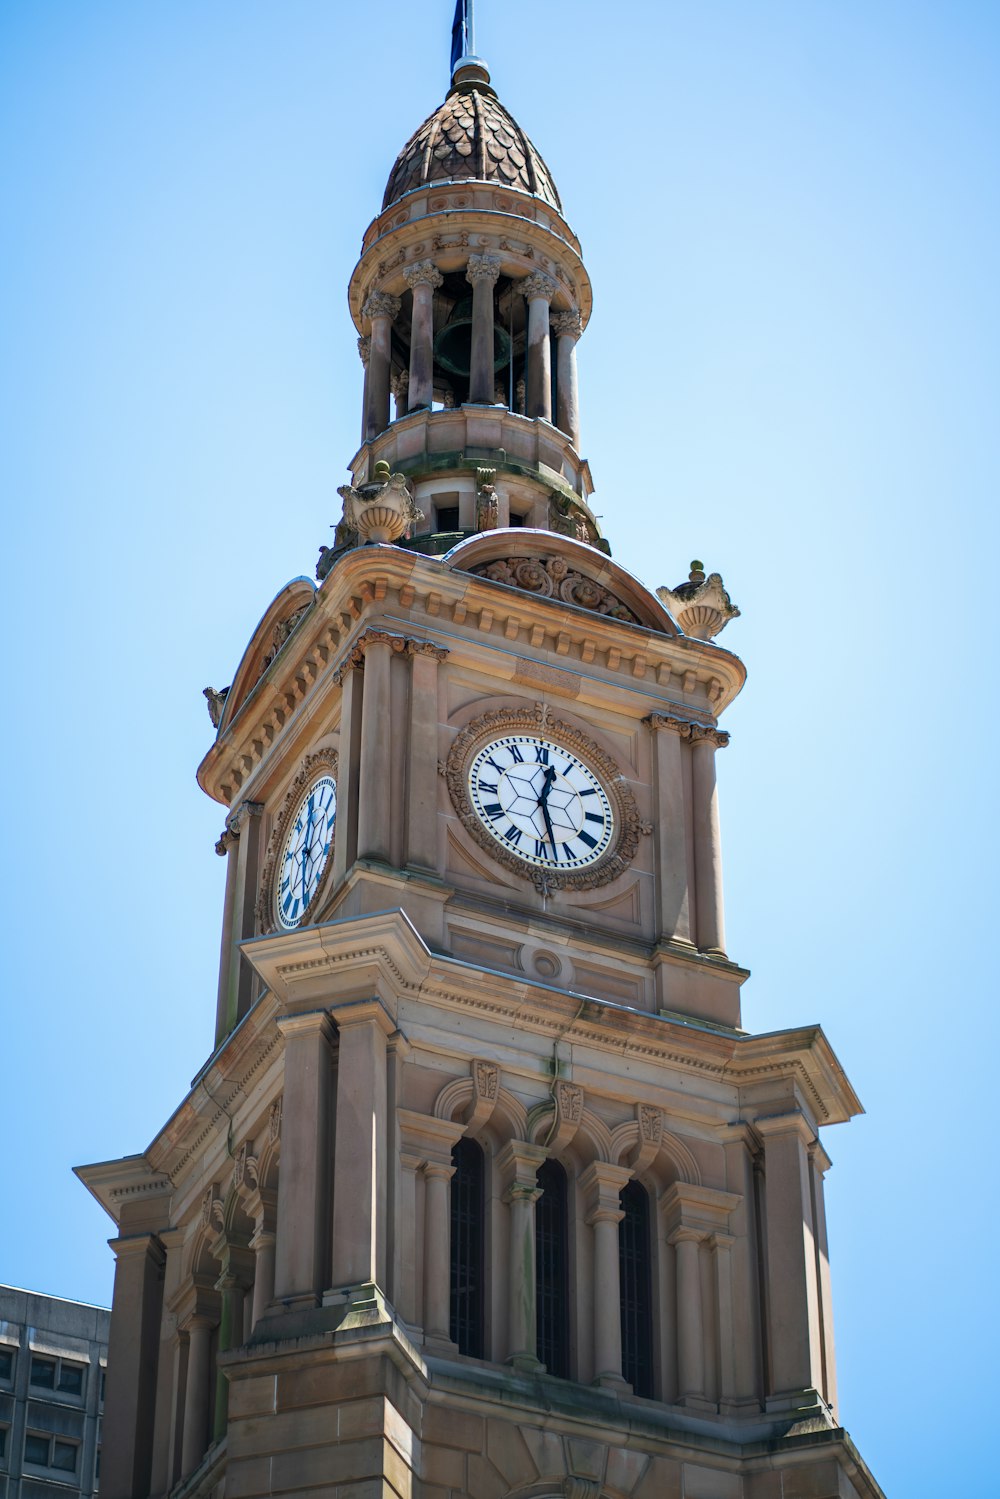 a clock tower with a weather vane